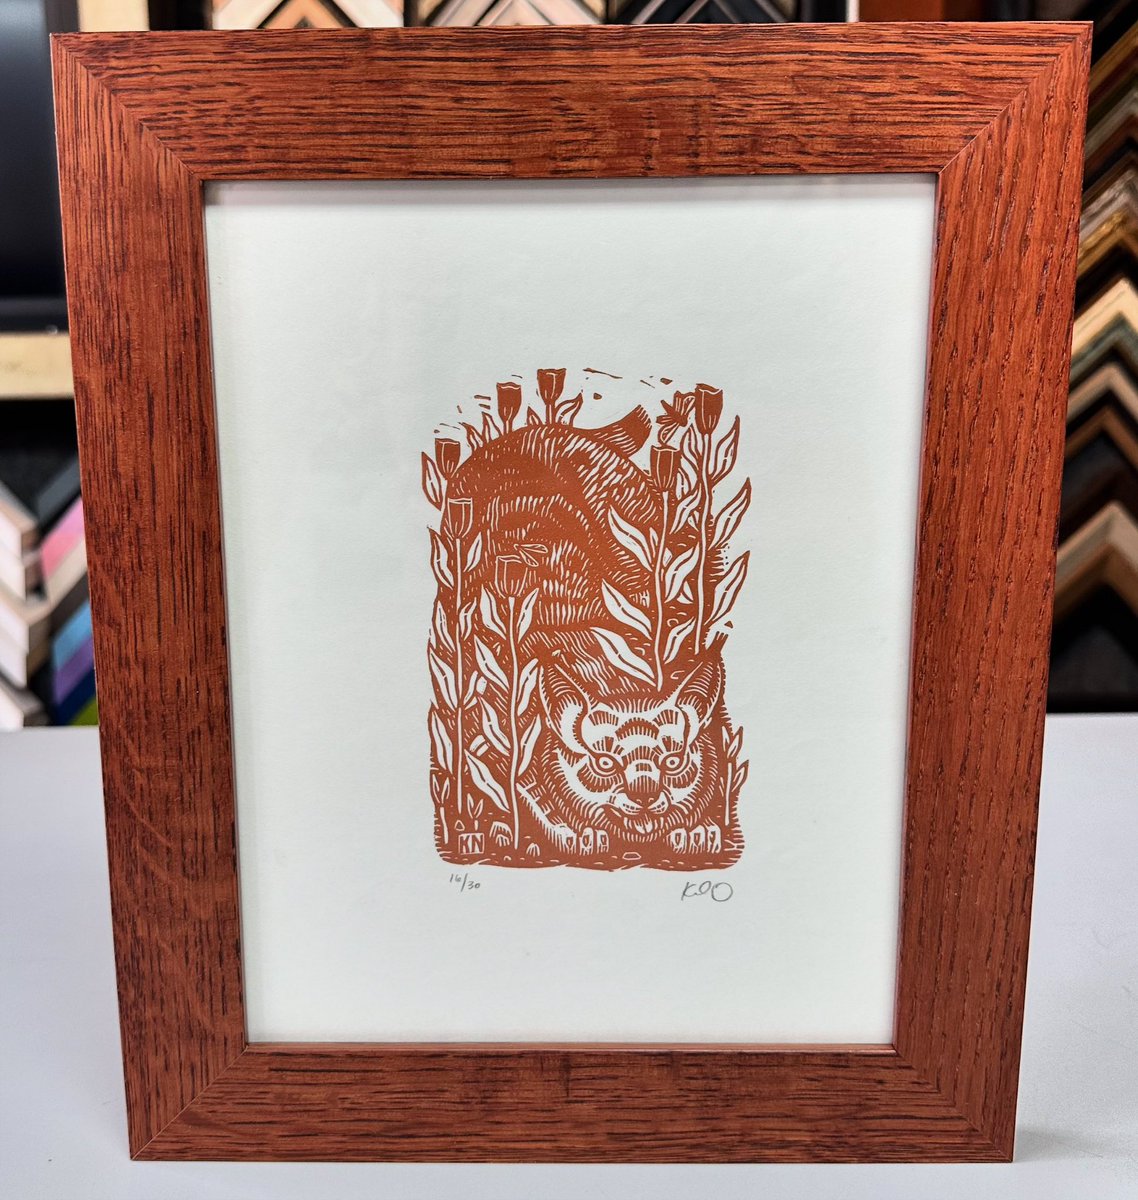 ‘Bobcat’ by @kathleenneeley custom framed using museum glass, glass spacers and oak frame by Picture Woods, Ltd.! #art #denver #colorado #pictureframing #customframing #5280customframing #bobcat #kathleenneeley @truvueglazing